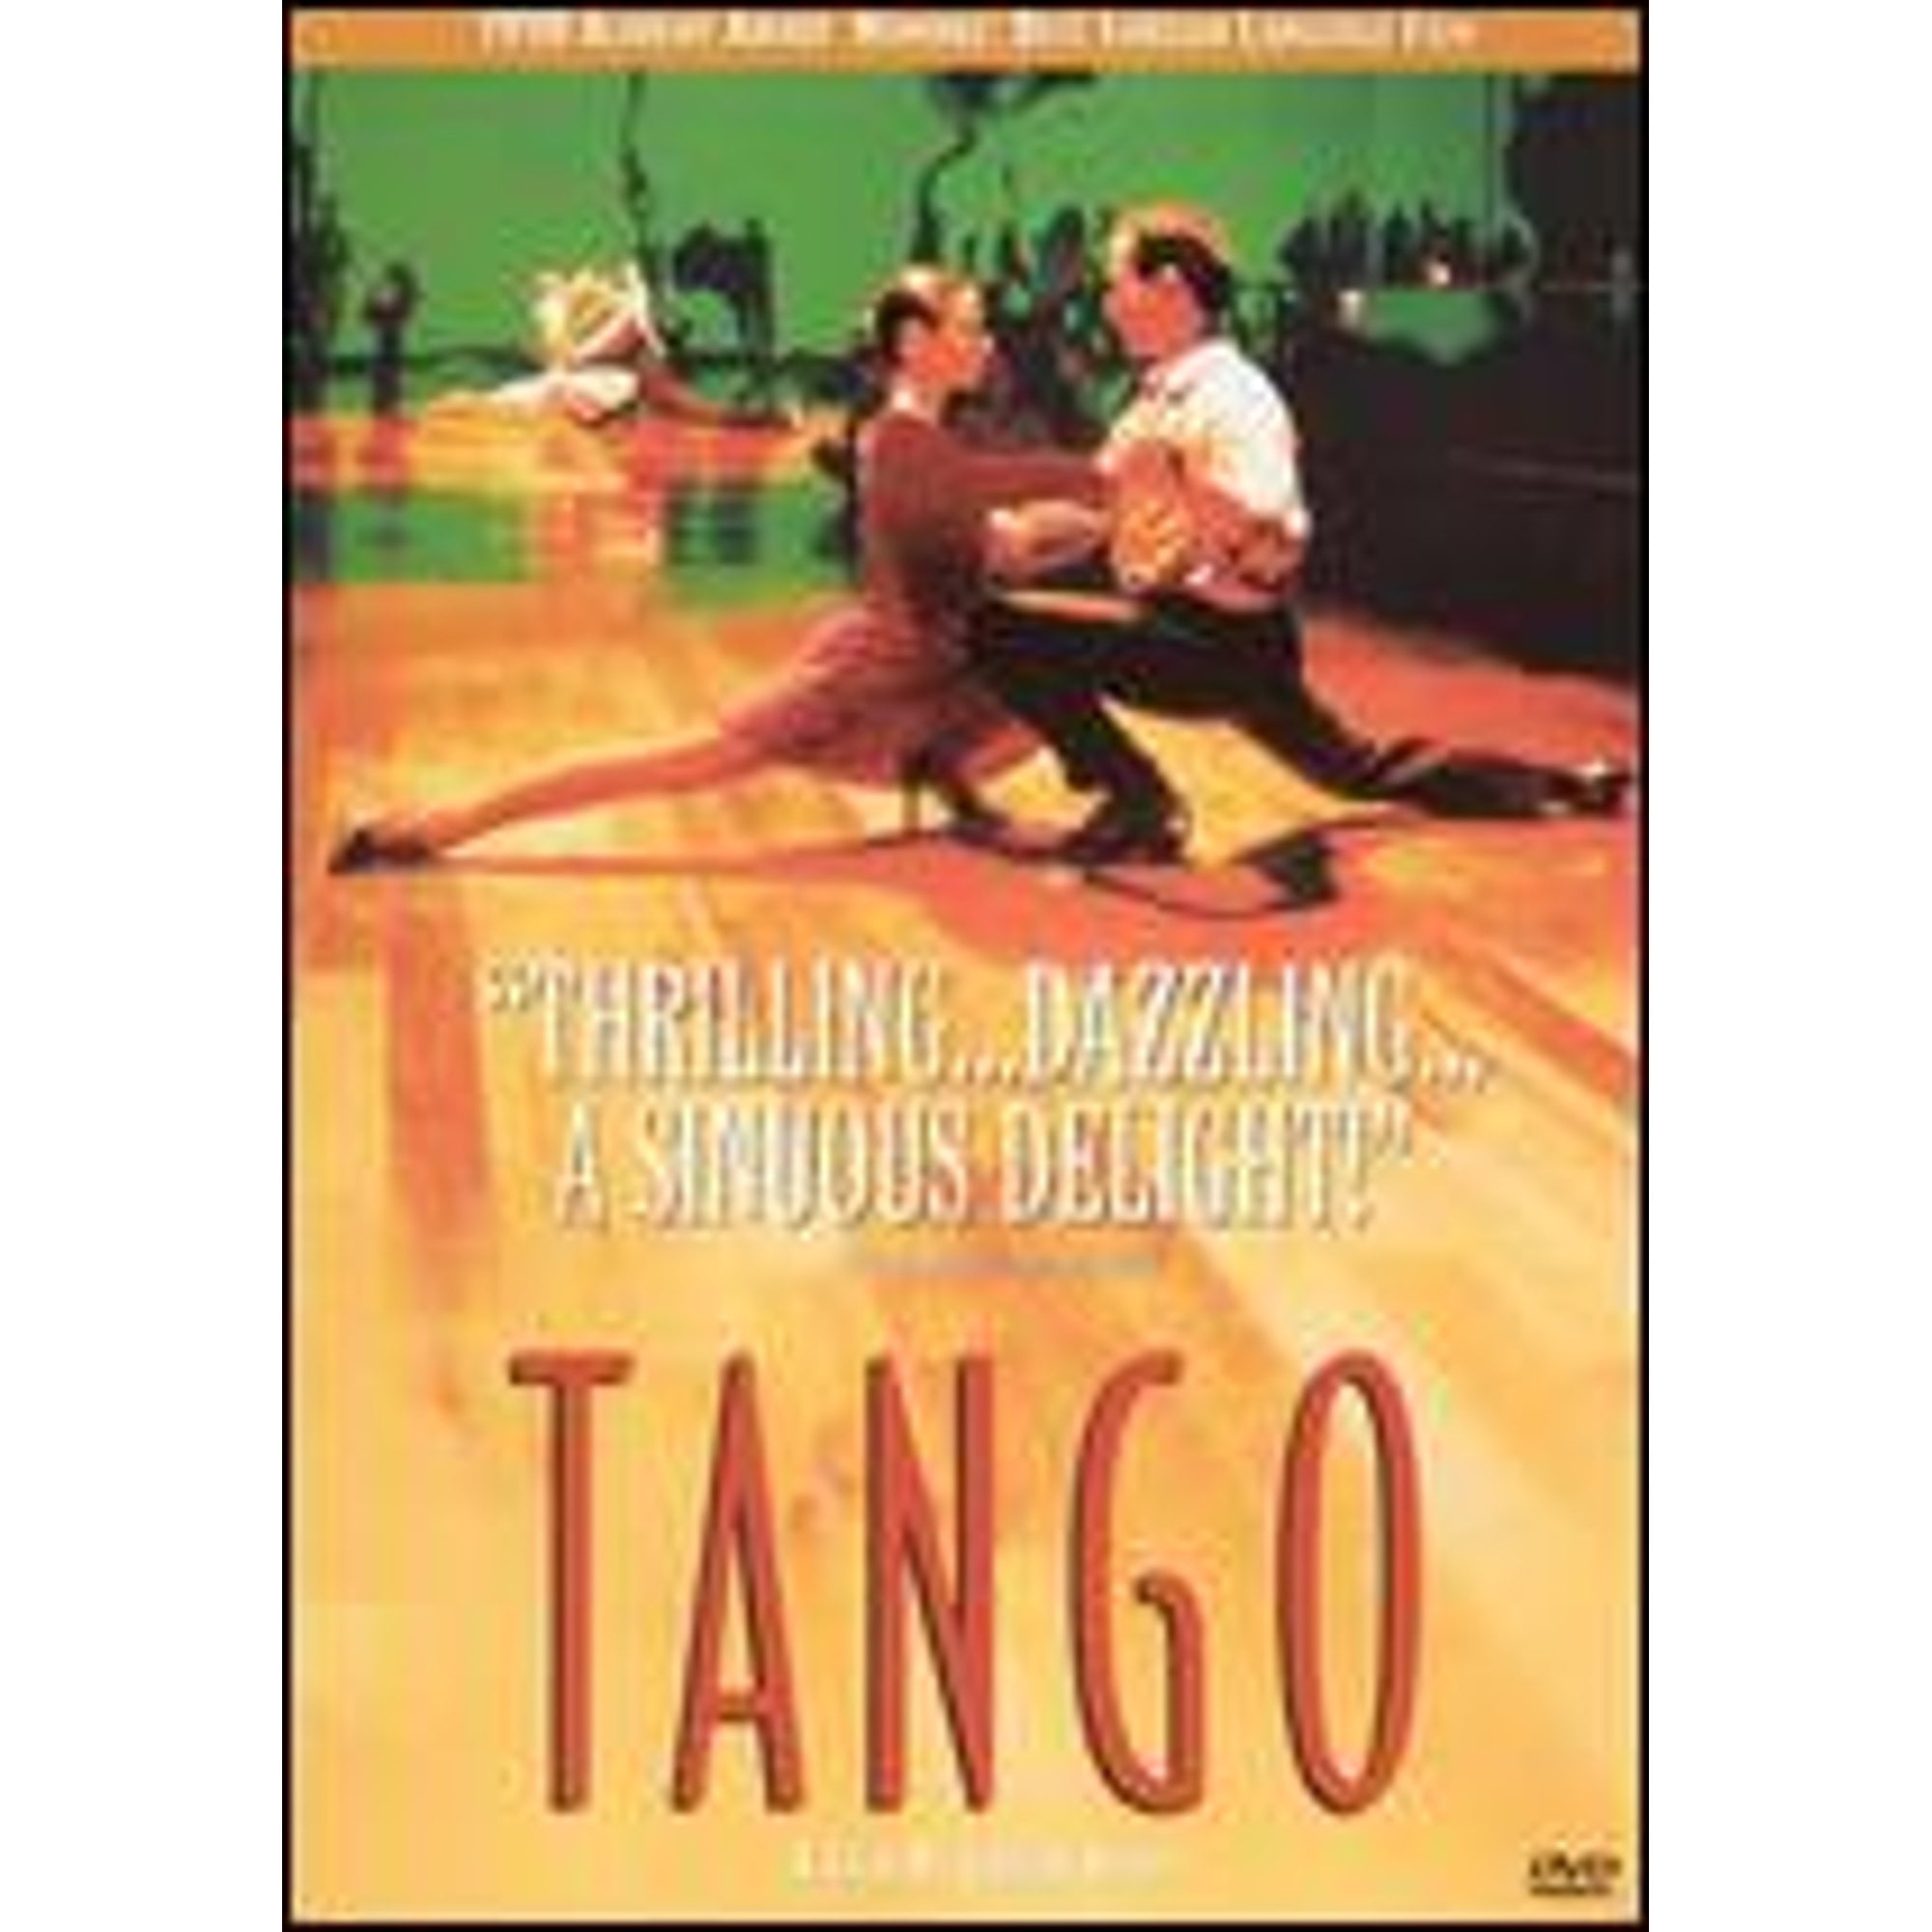 Pre-Owned Tango (DVD 0043396038349) directed by Carlos Saura